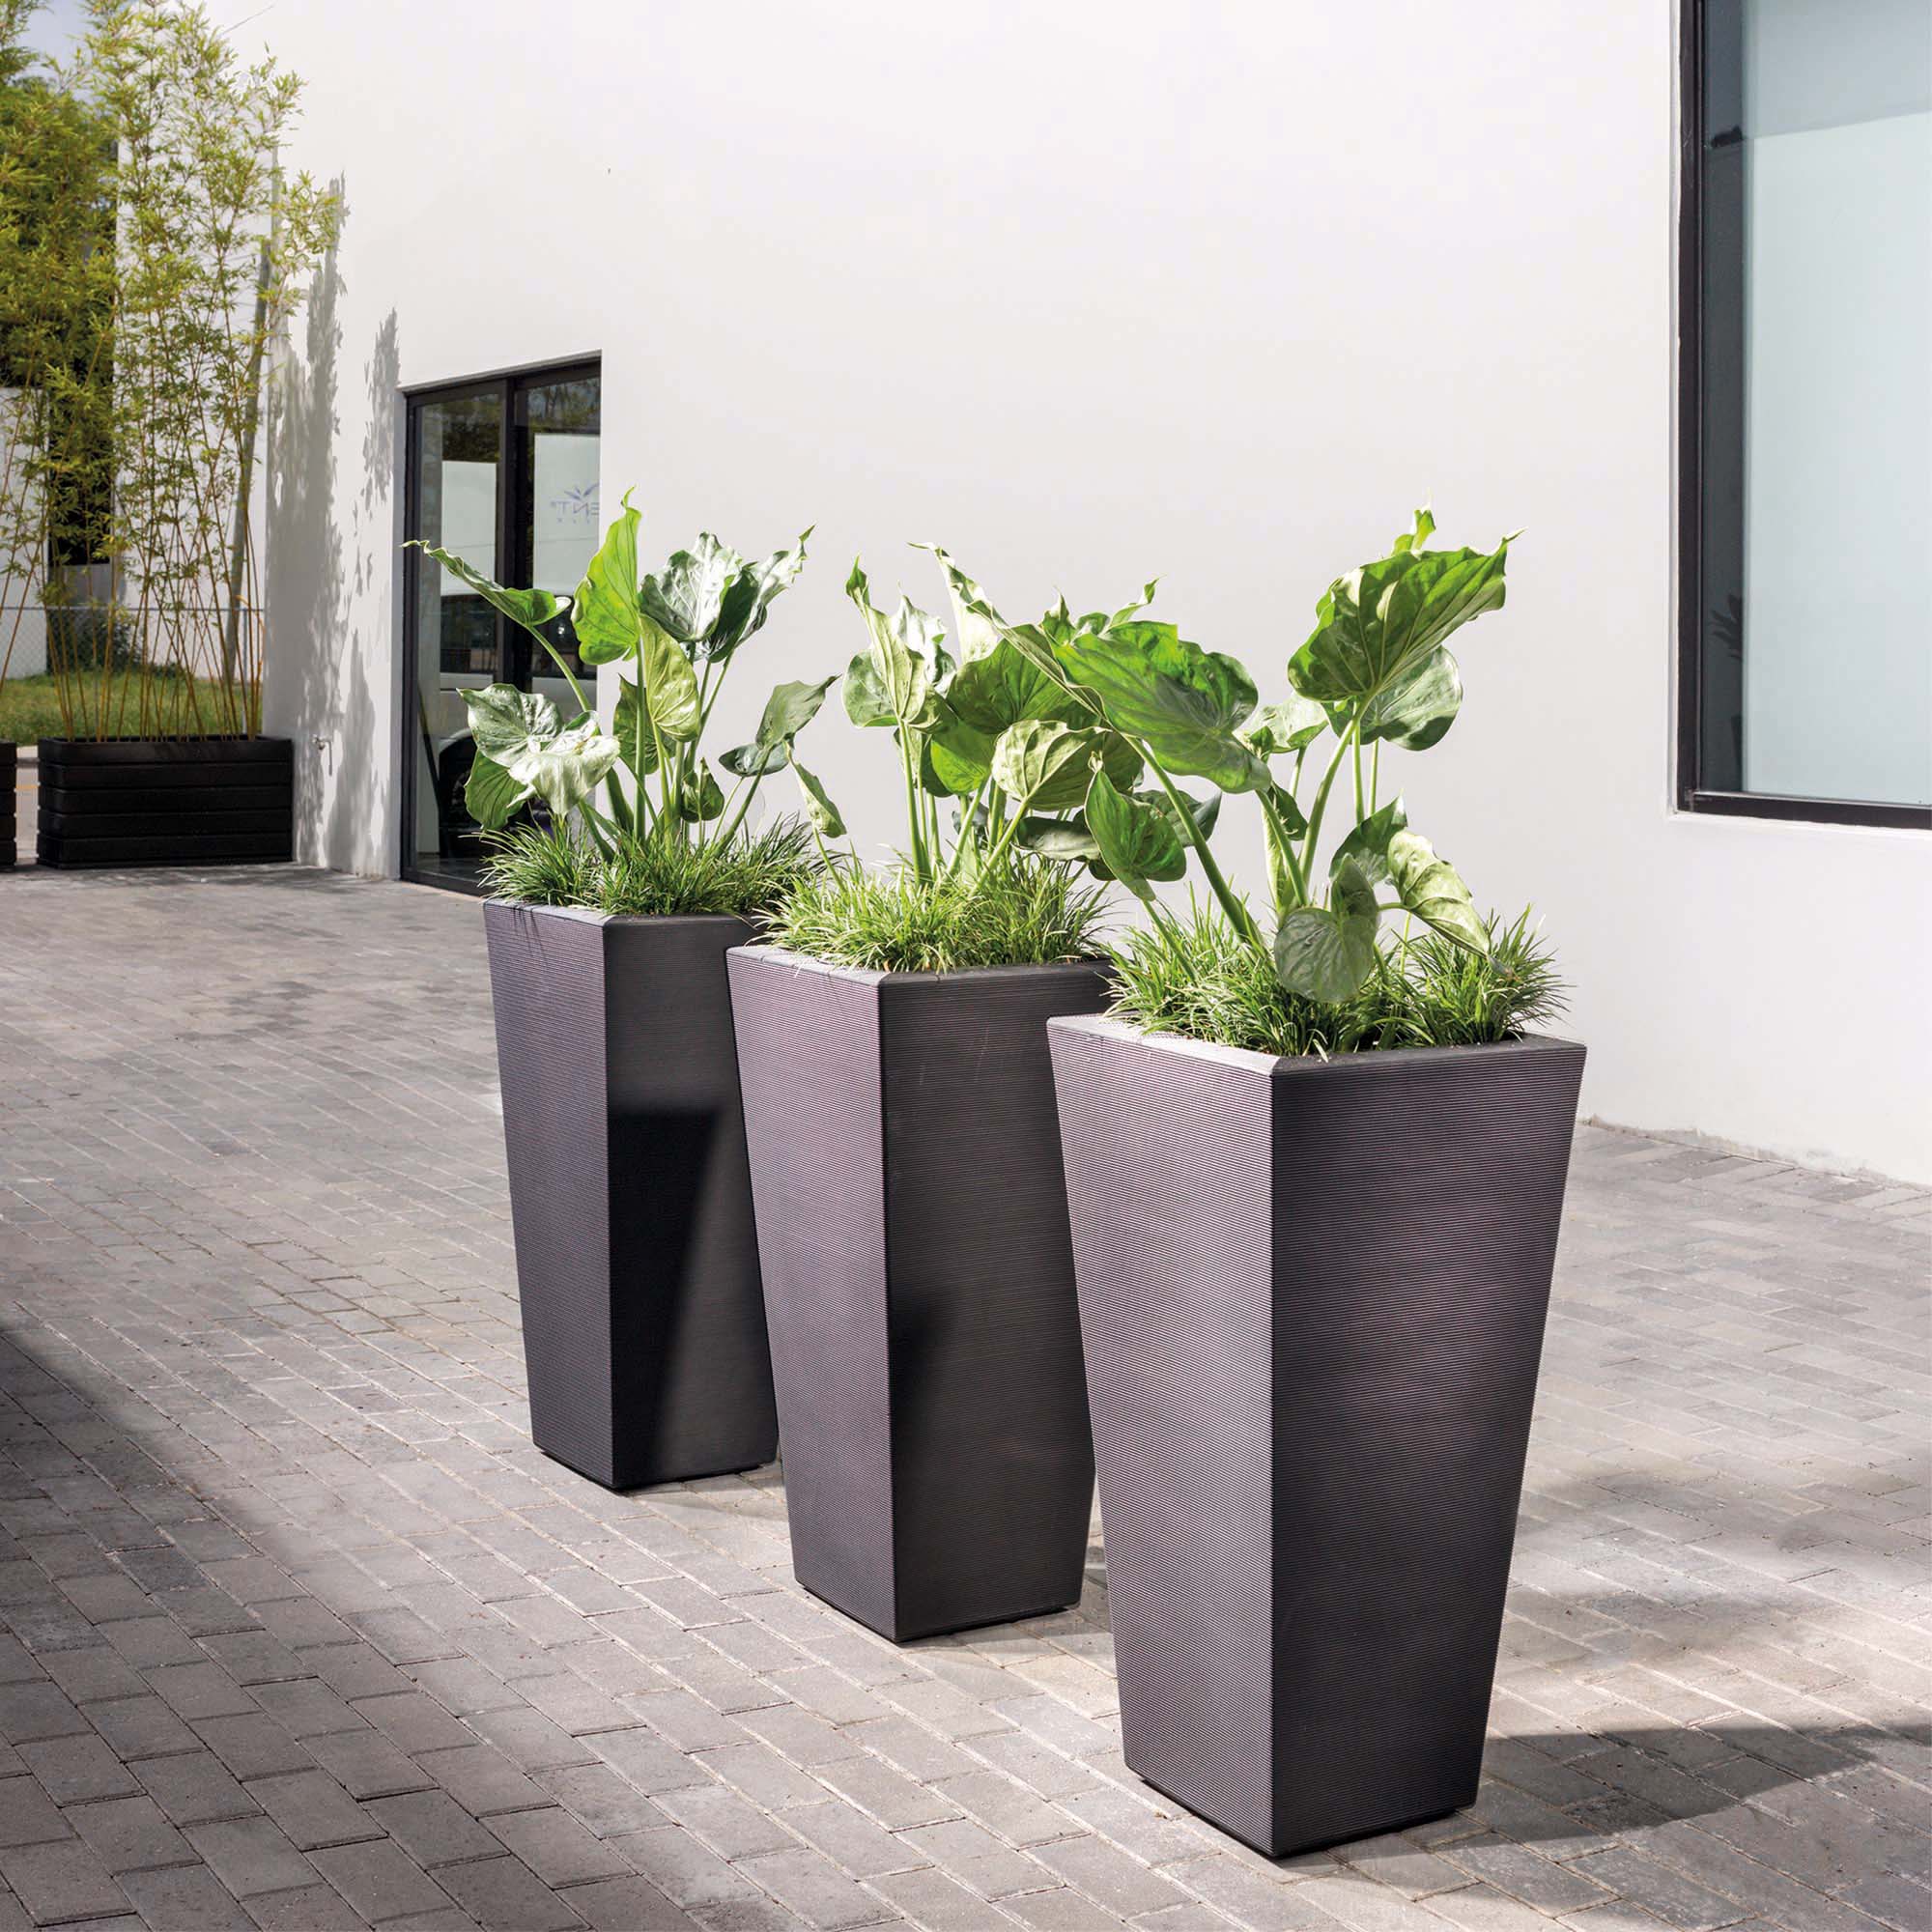 Trio of Bowery Planters in driveway